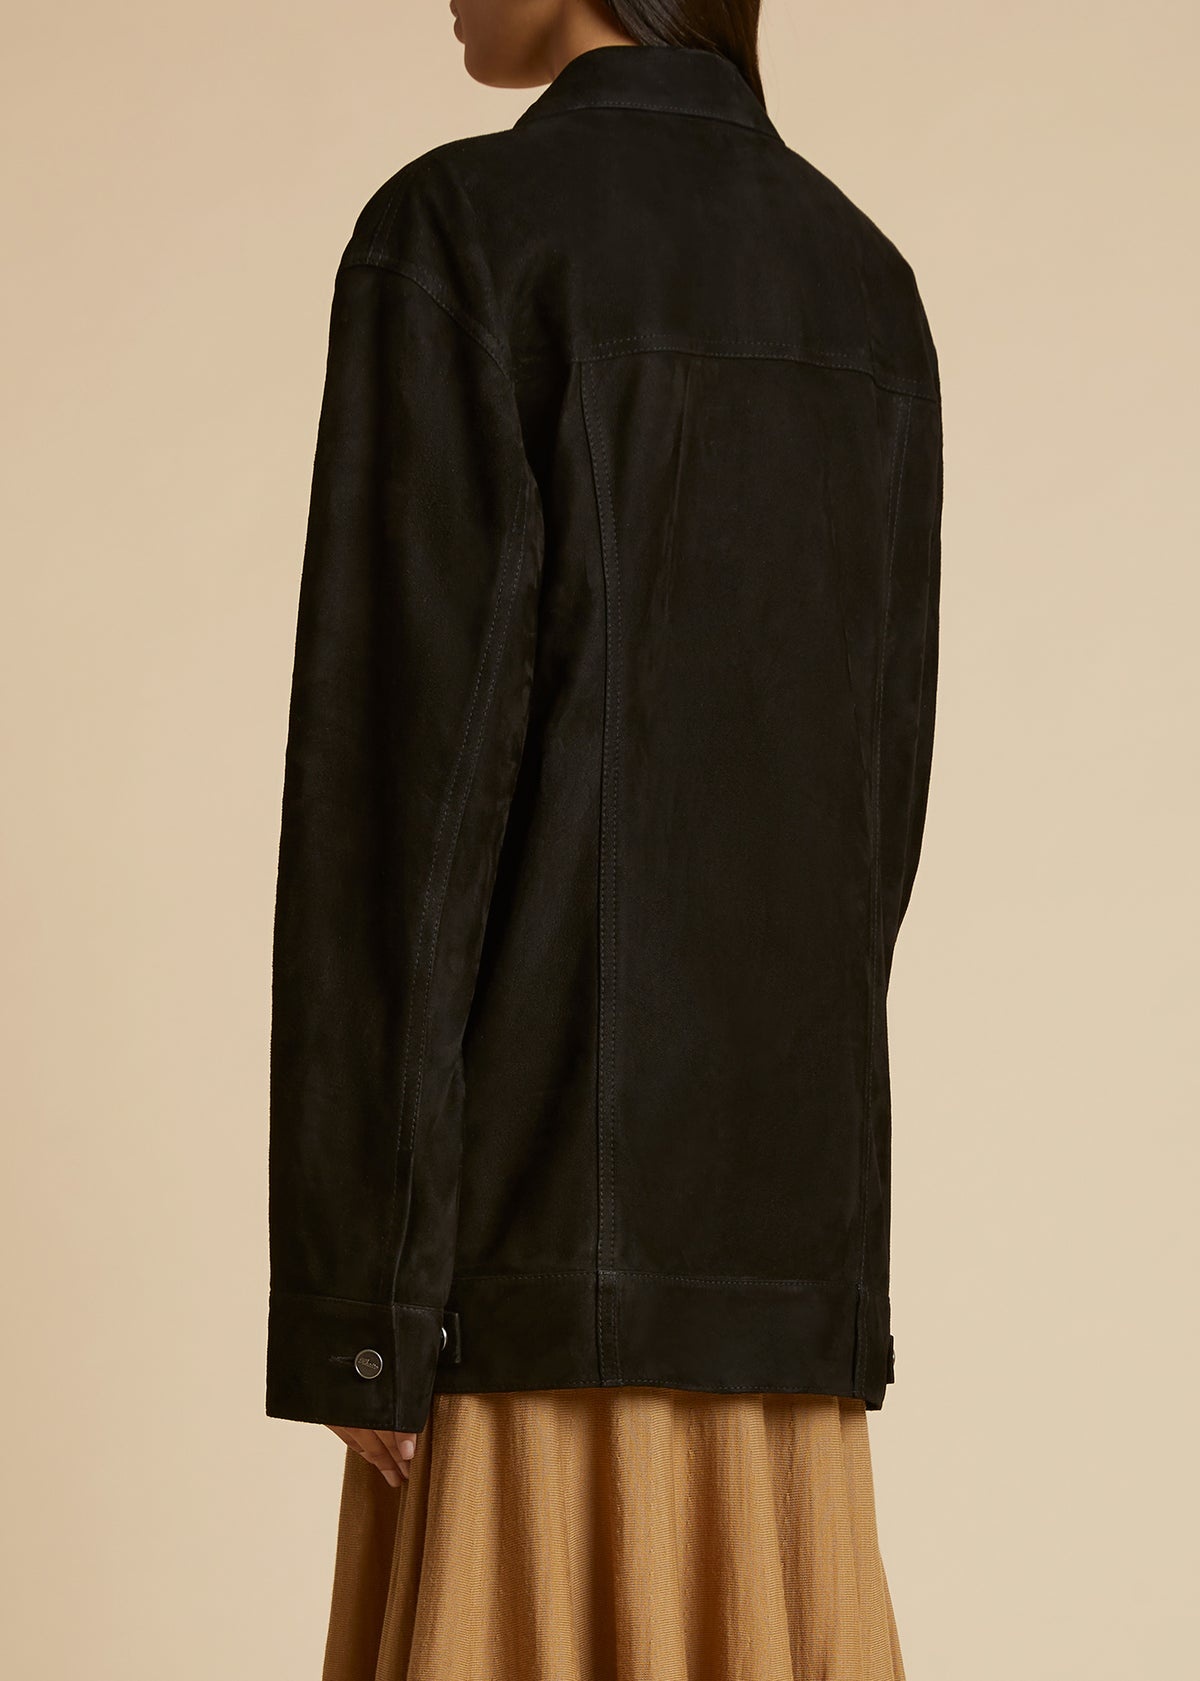 The Ross Jacket in Black Suede - 3